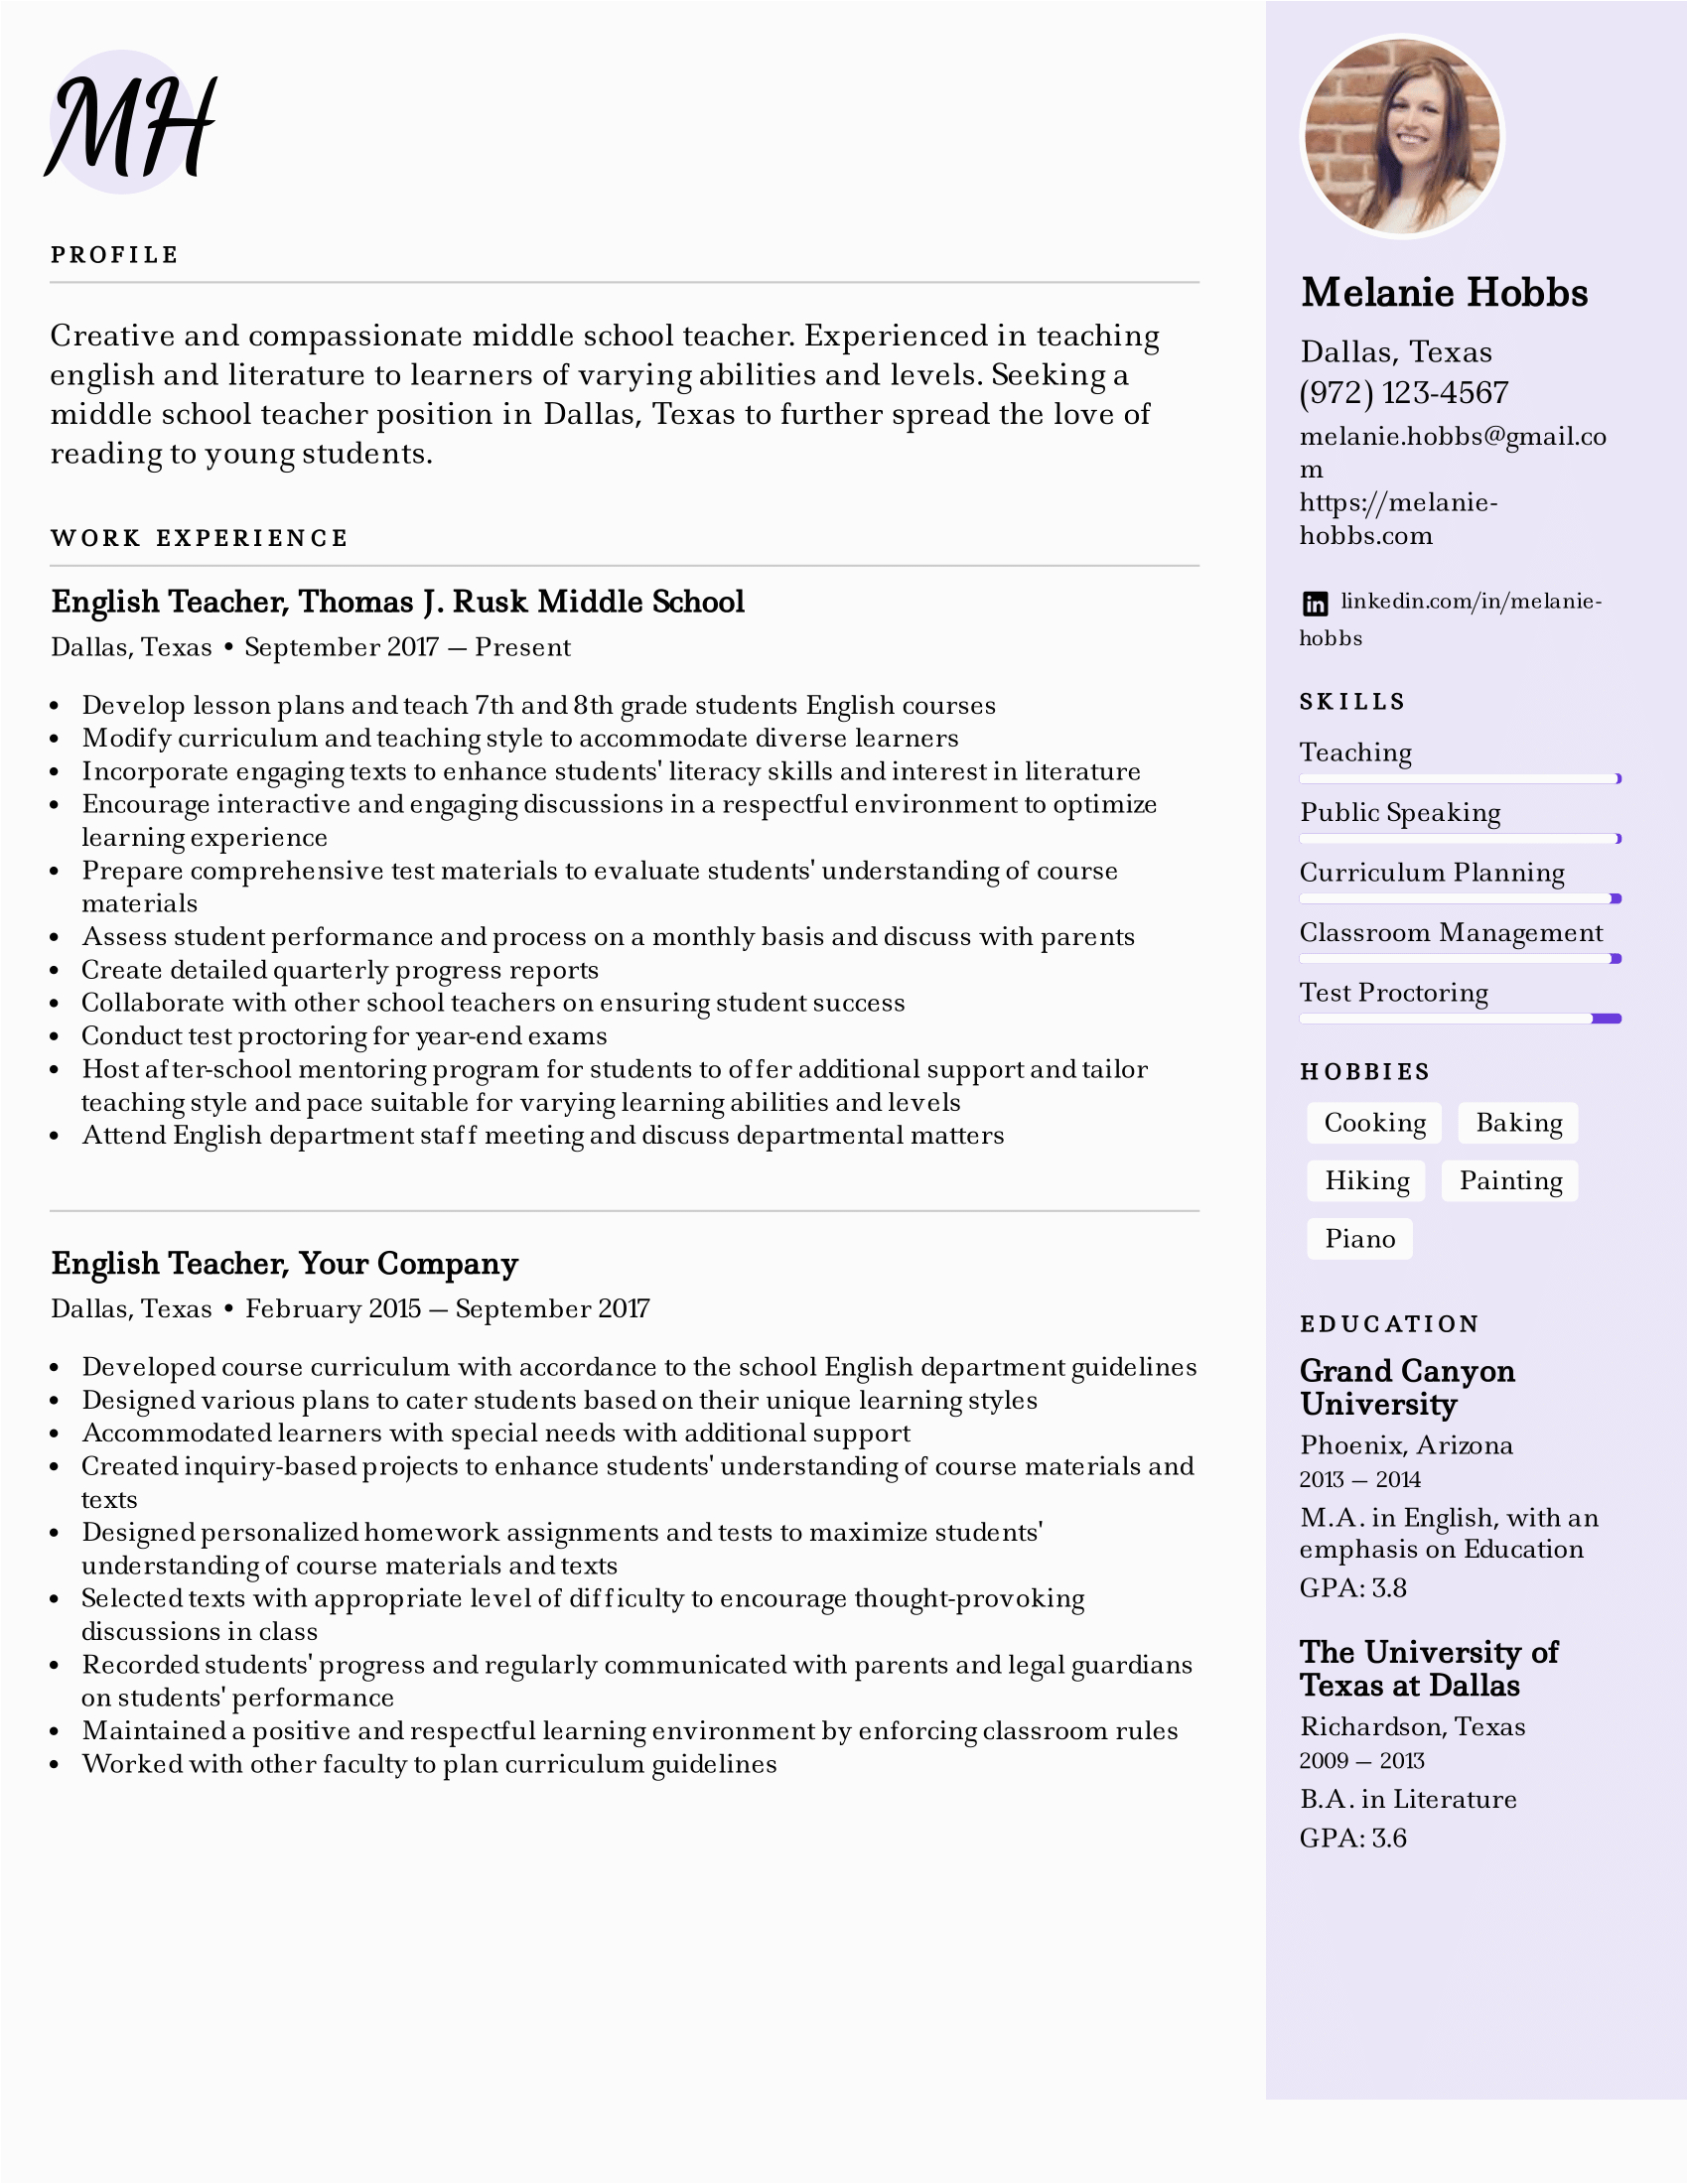 Resume Template for Middle School Students Middle School Teacher Resume Example & Writing Tips for 2021